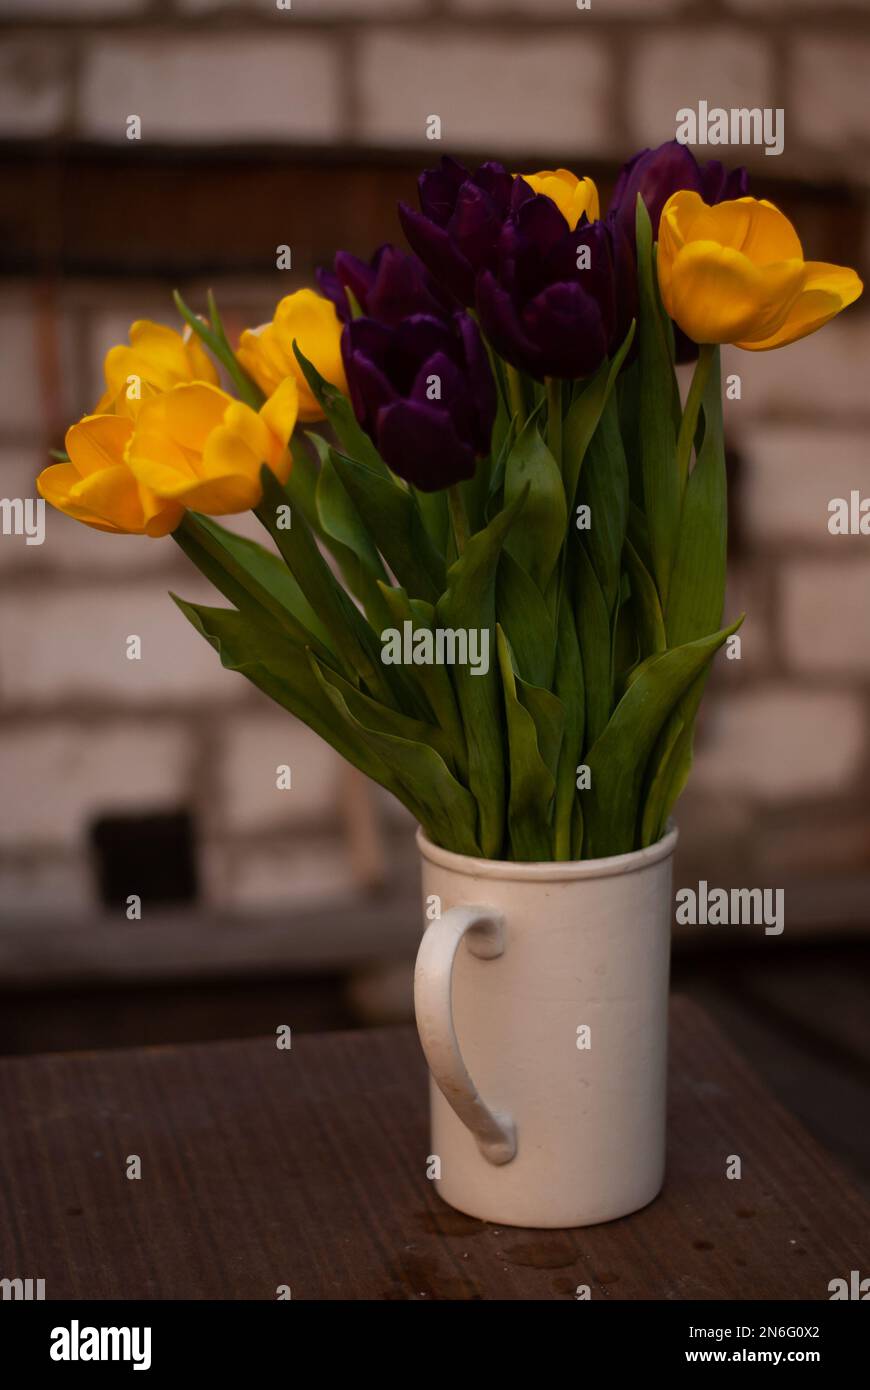 Yellow and purple tulips in a vase in the garden Stock Photo